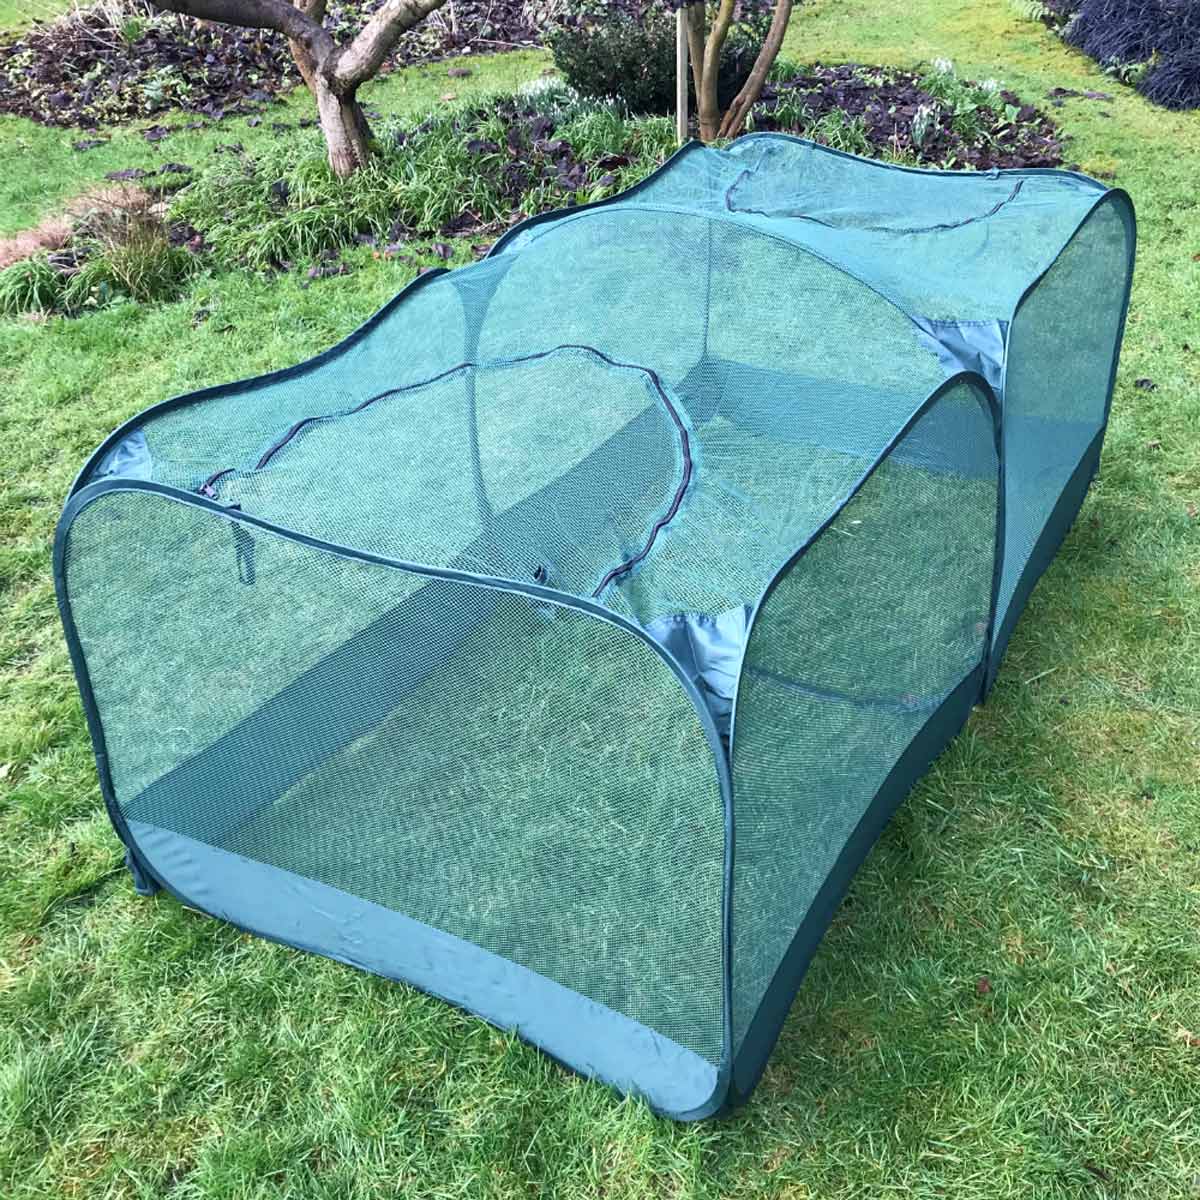 Garden Skill Gardenskill Giant Pop Up Fruit Cage And Plant Protection Cover 2 X 1 X 0.75M